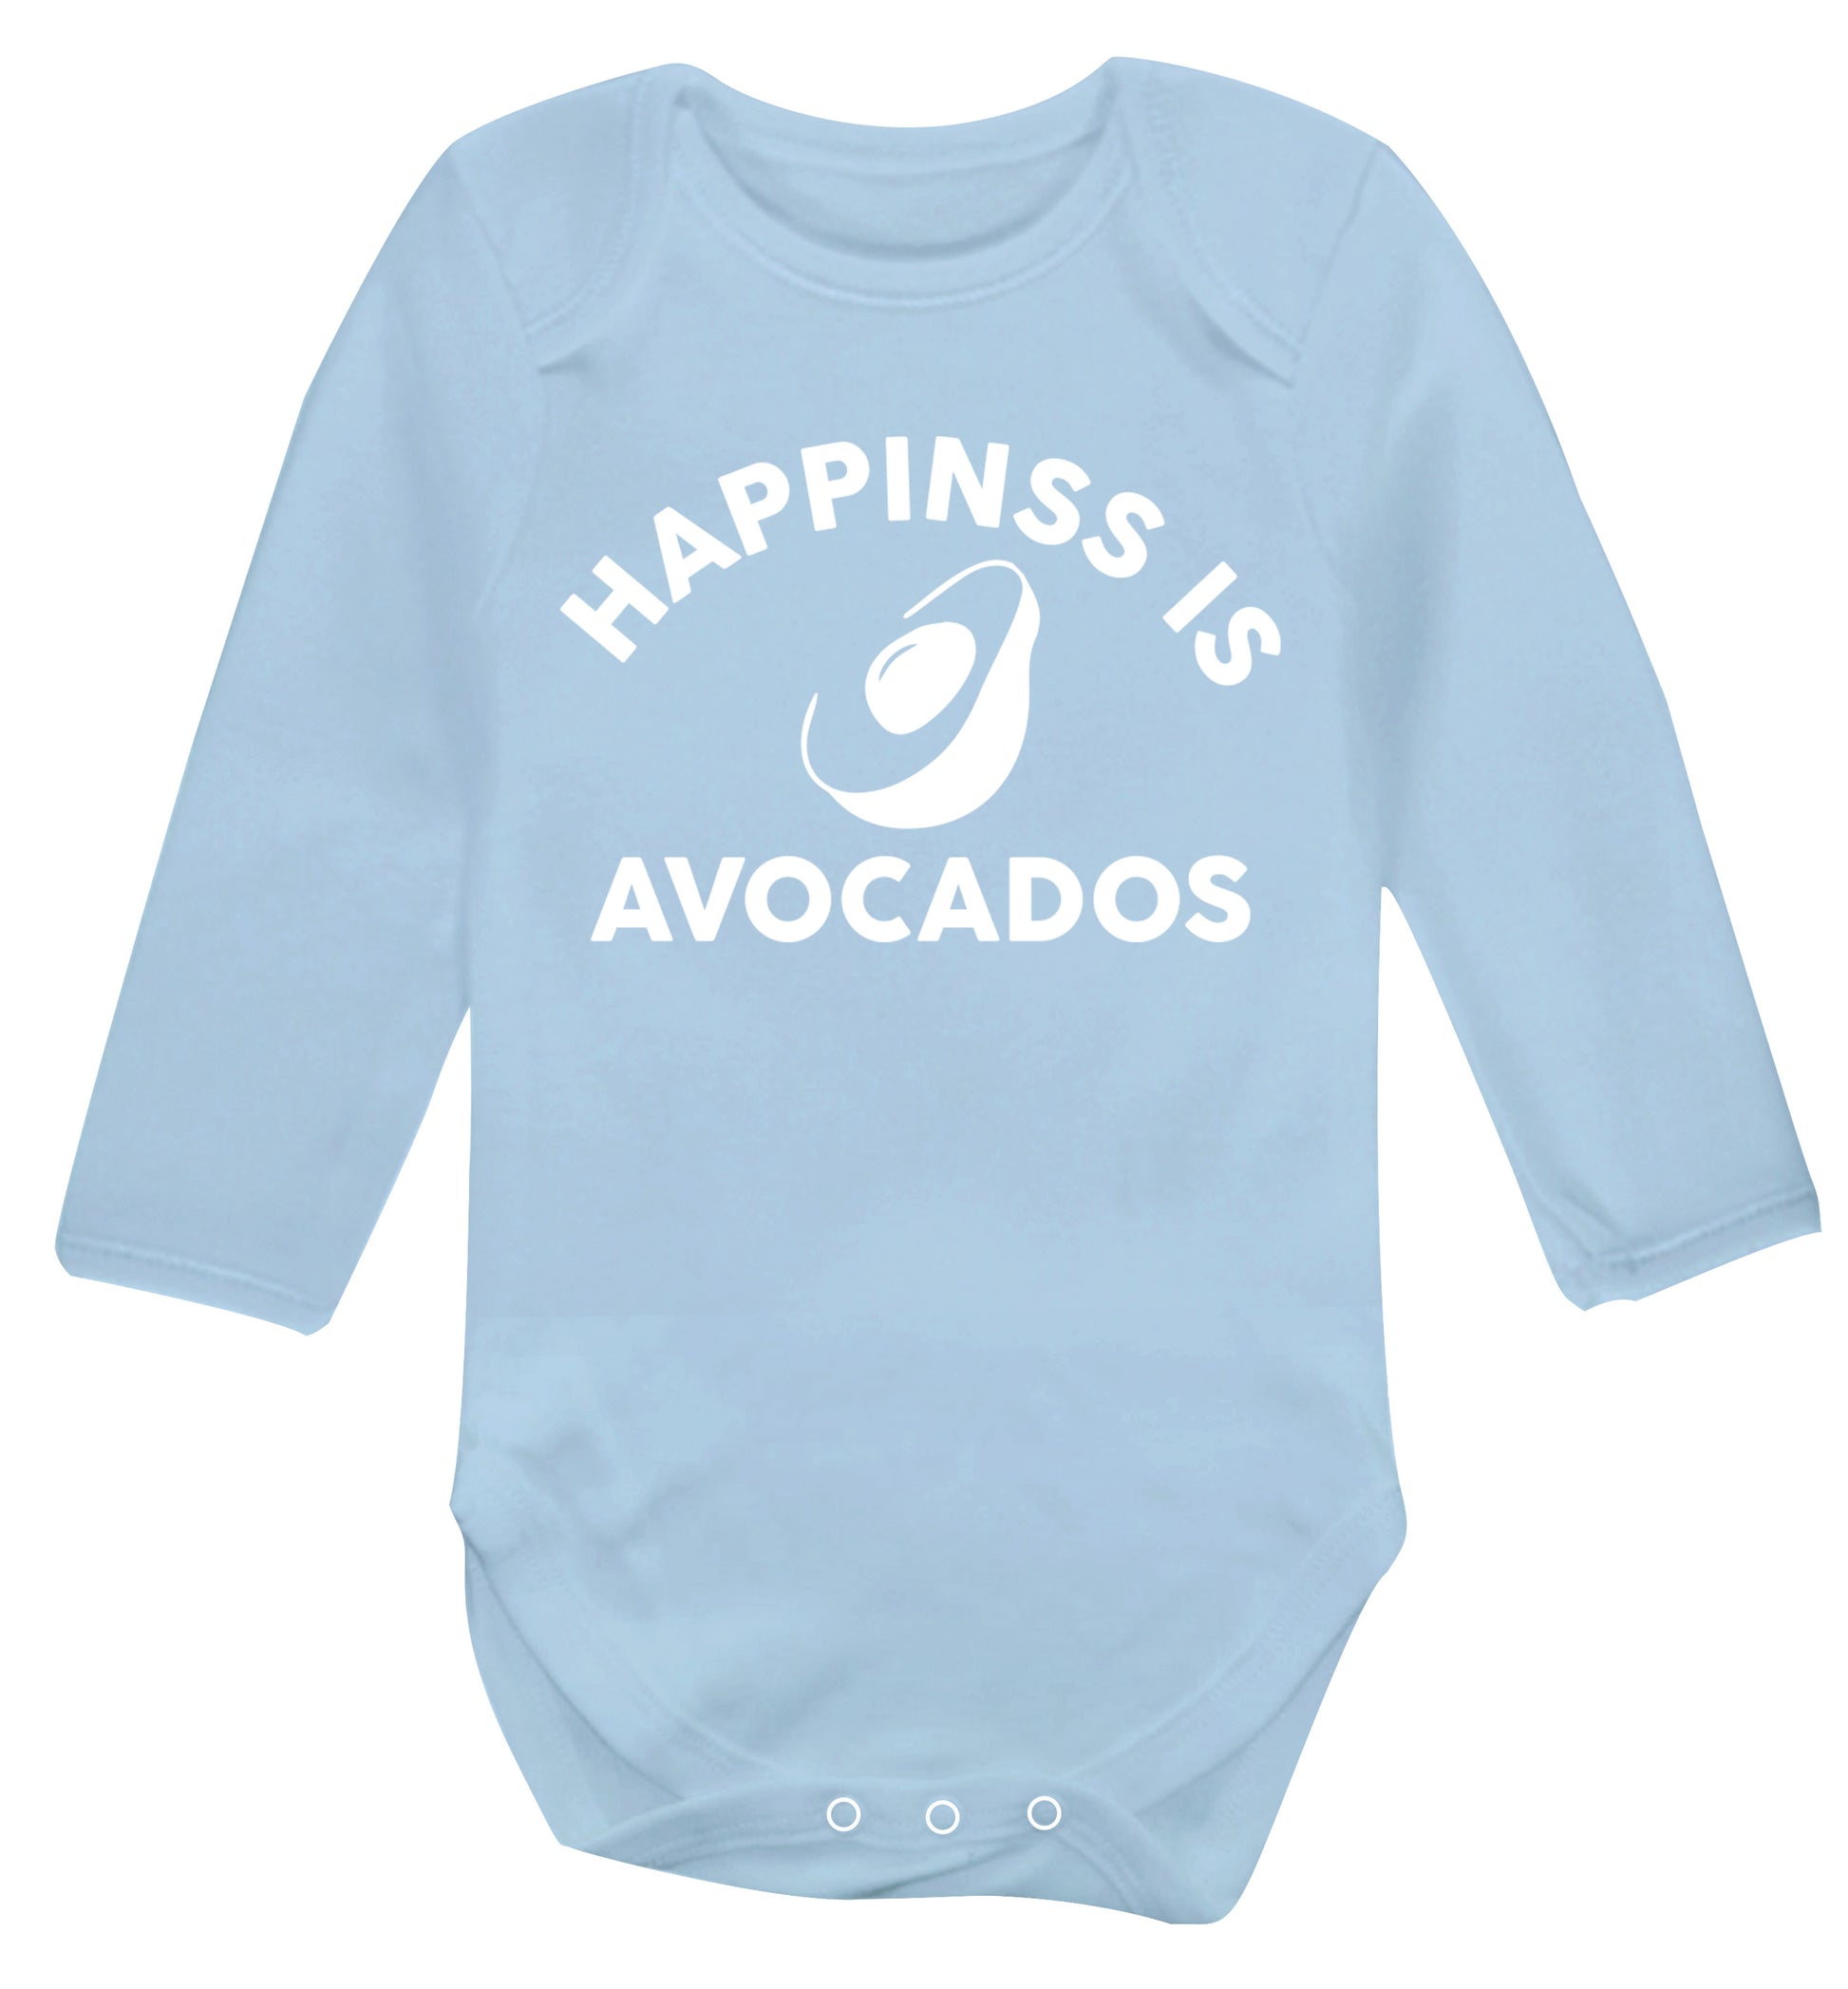 Happiness is avocados Baby Vest long sleeved pale blue 6-12 months